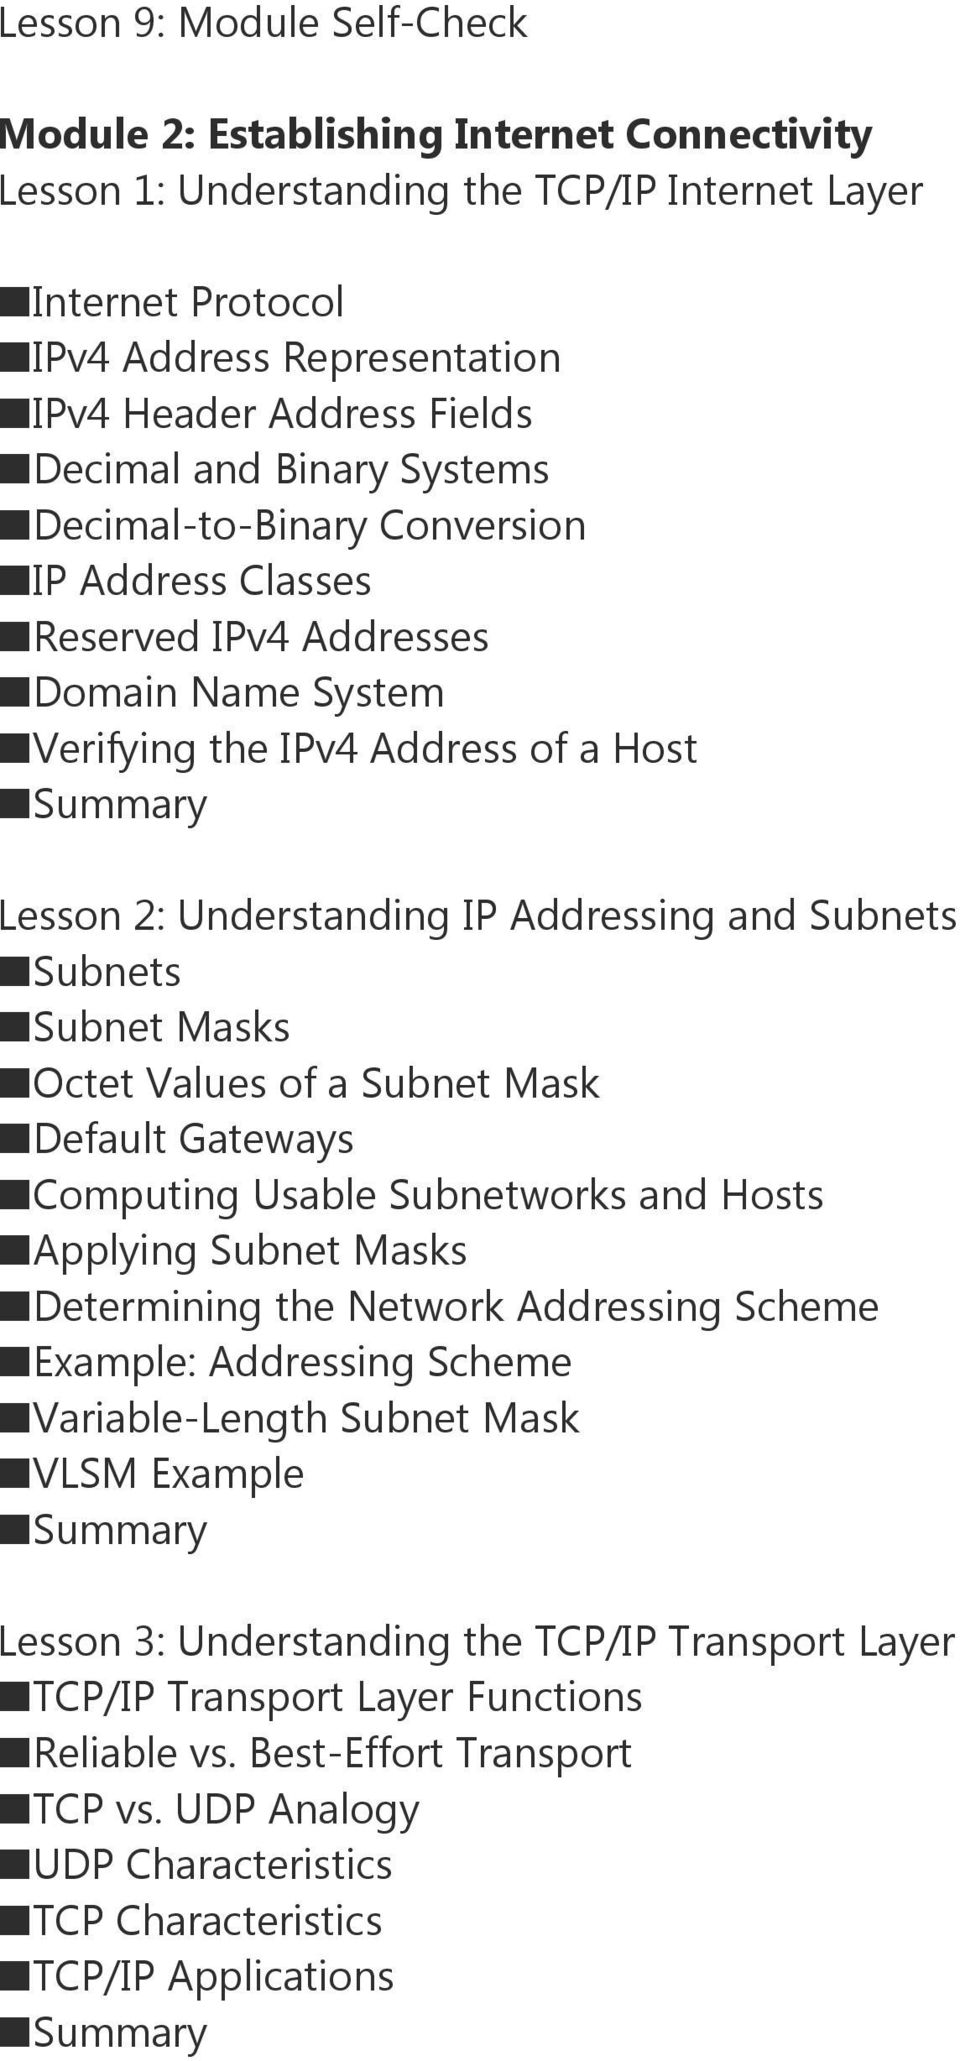 Subnets Subnets Subnet Masks Octet Values of a Subnet Mask Default Gateways Computing Usable Subnetworks and Hosts Applying Subnet Masks Determining the Network Addressing Scheme Example: Addressing